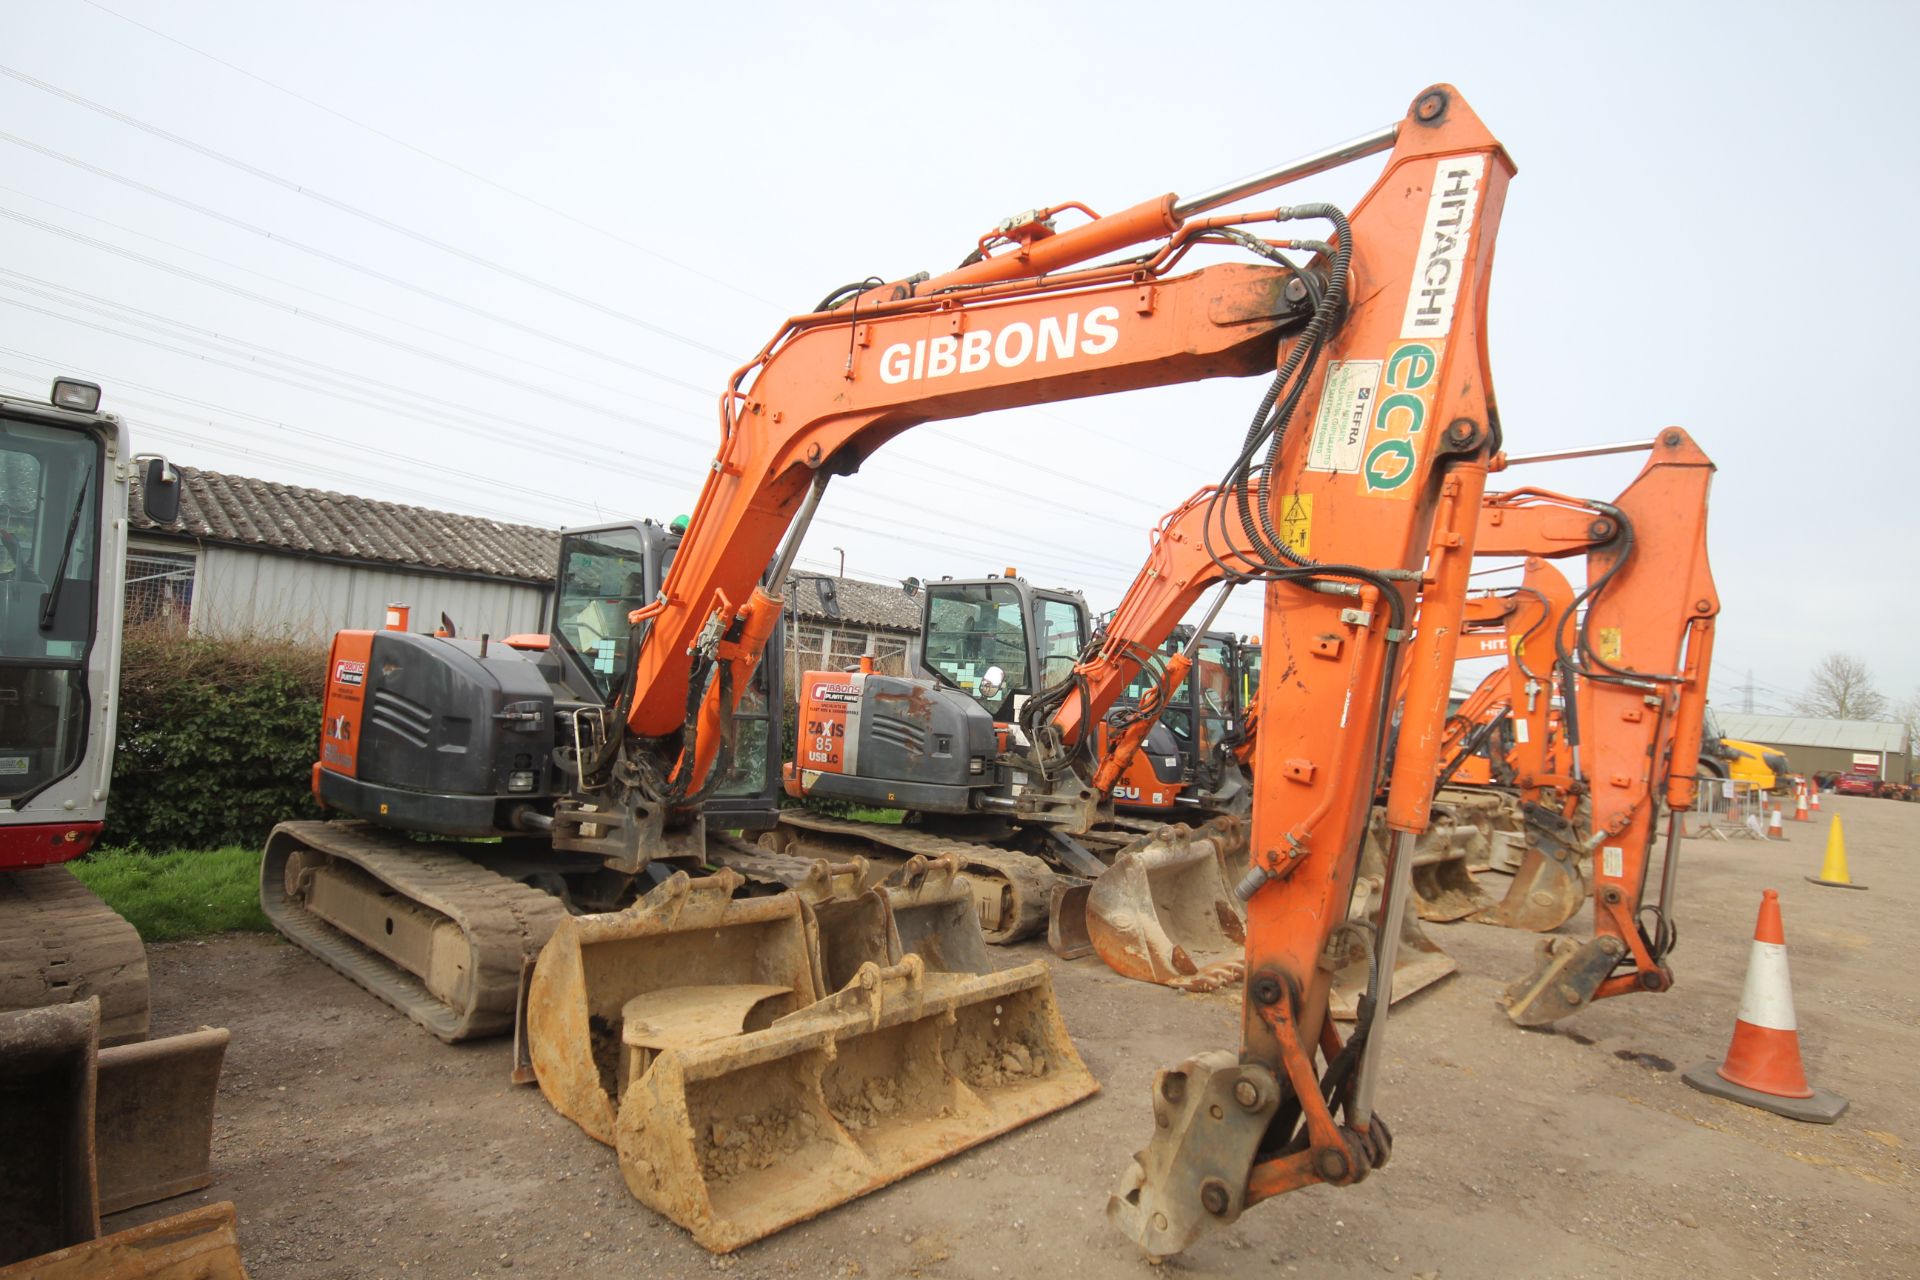 Hitachi Z-Axis 85-USB-5A 8.5T rubber track excavator. 2016. 4,704 hours. Serial number HCM DEE50K